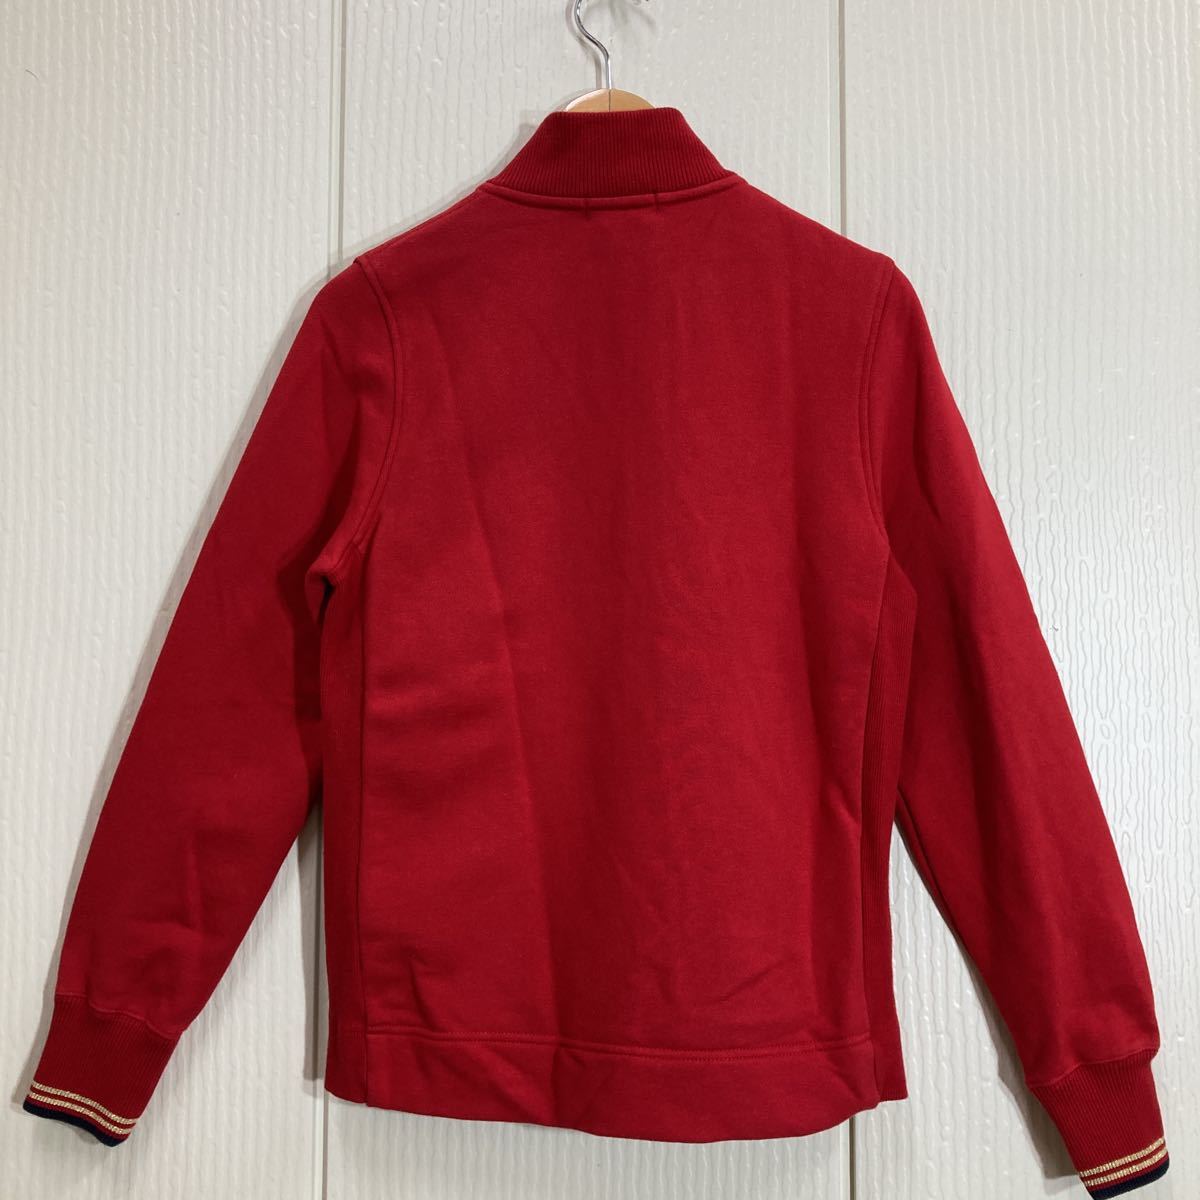 226 Onward 23 district SPORT Zip up sweat jacket high‐necked GOLF Golf embroidery size 1 red lady's 30121B